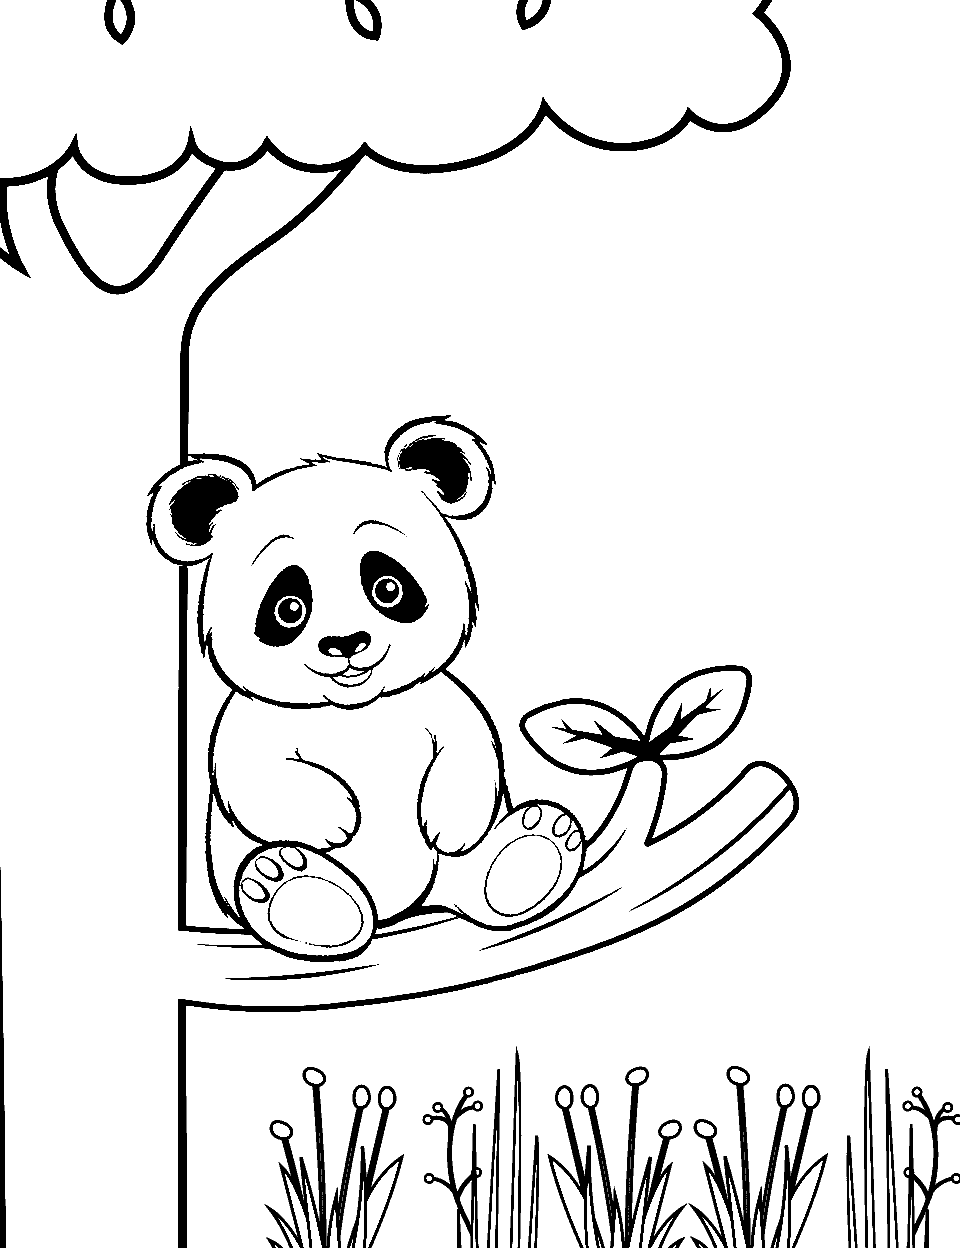 Curious Panda in a Tree Coloring Page - A panda exploring a sturdy tree branch, looking inquisitively at a distant object.